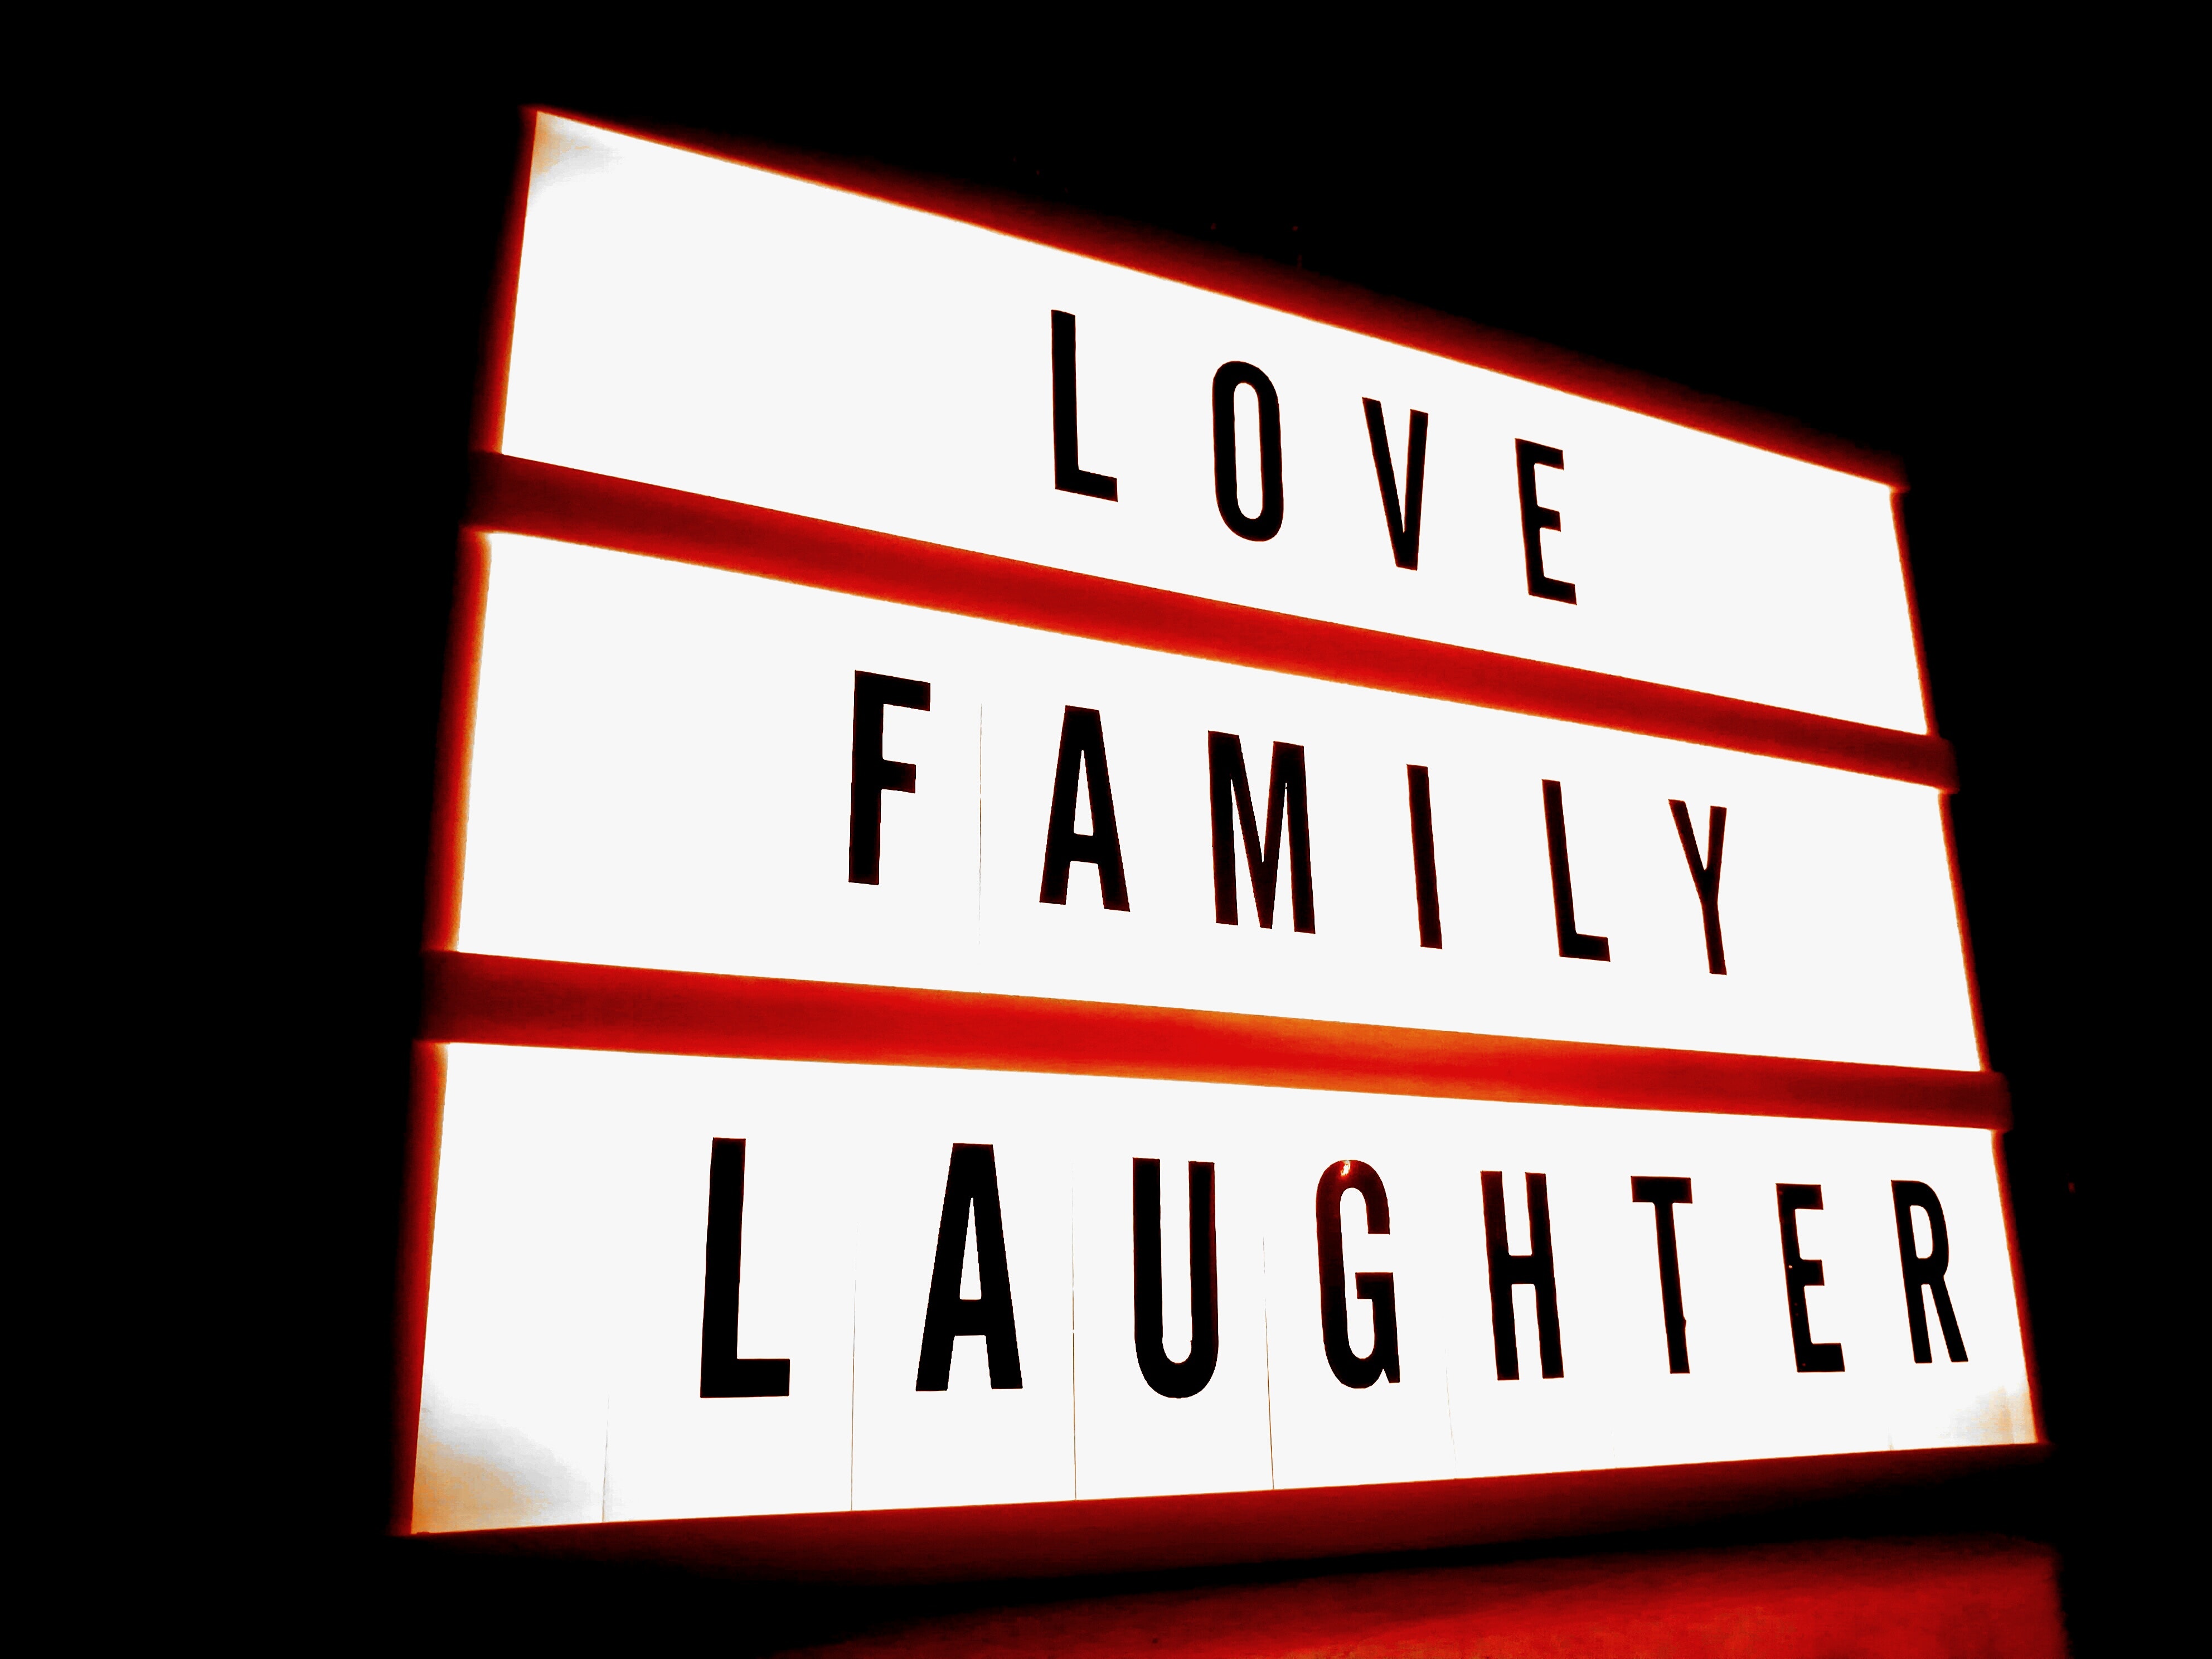 White and red led signage with love family laughter text photo